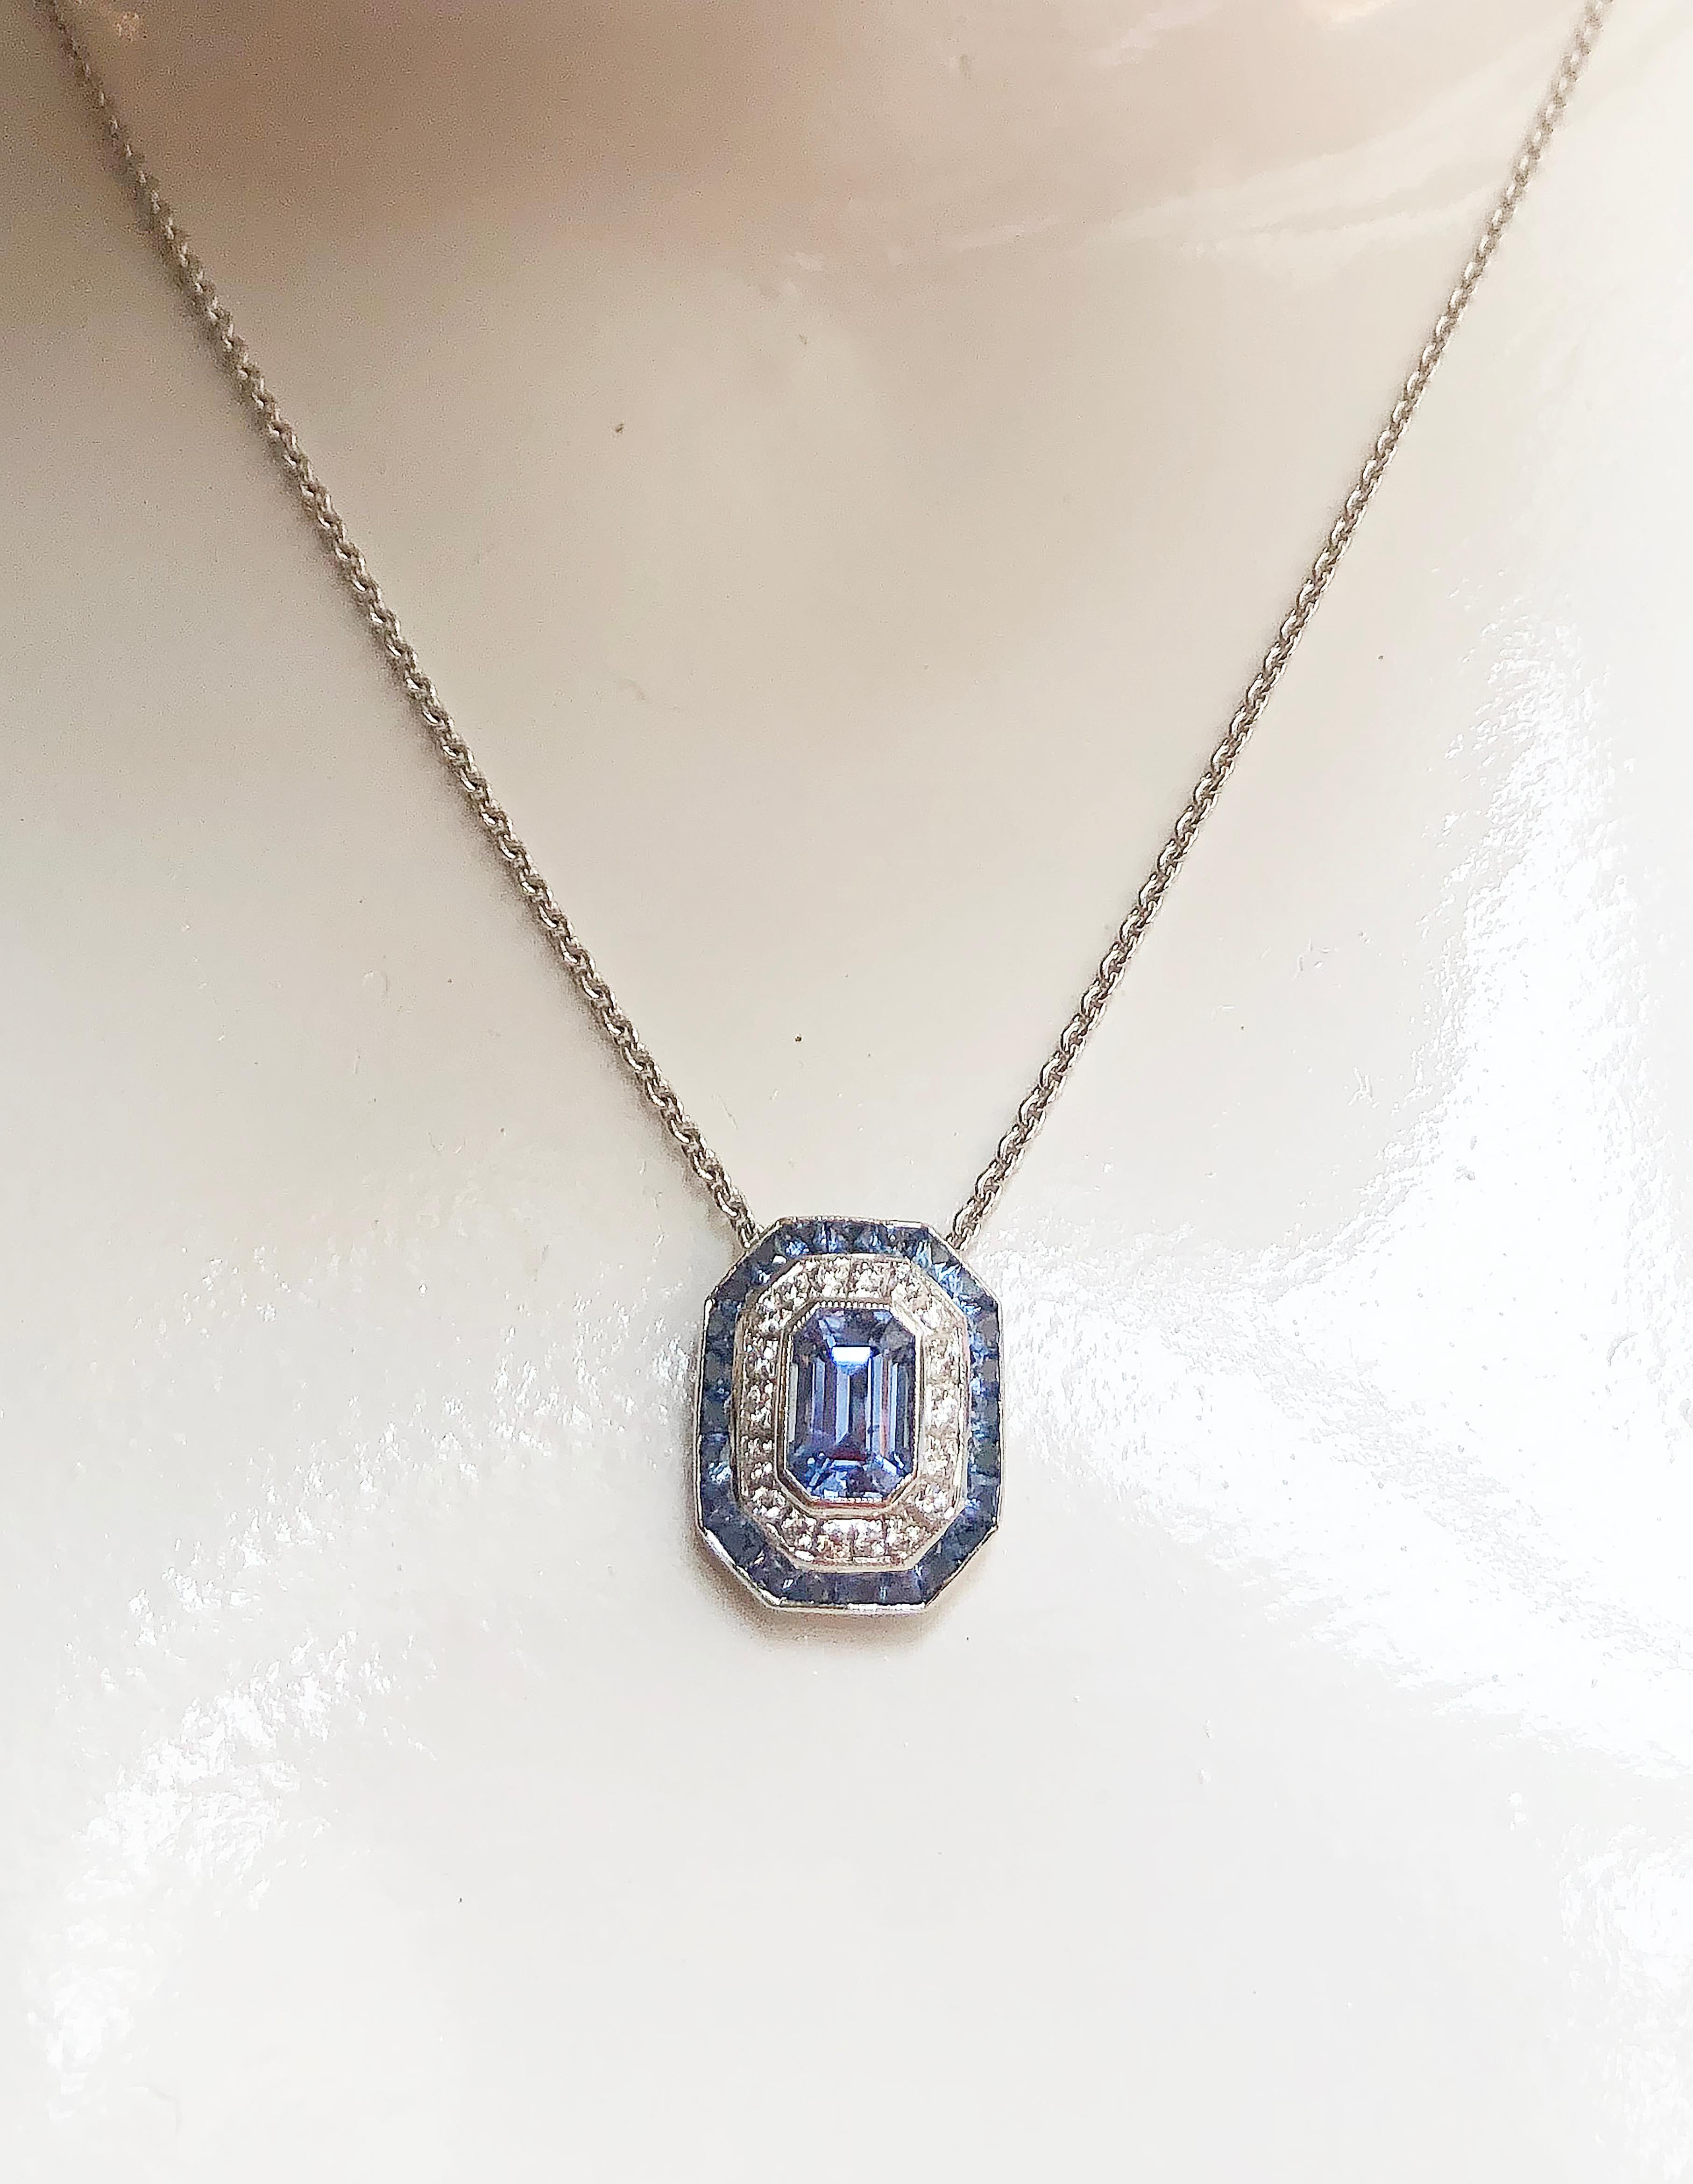 Blue Sapphire 1.24 carats with Diamond 1.60 carats Pendant set in 18 Karat White Gold Settings
(chain not included)

Width:  1.2 cm 
Length: 1.5 cm
Total Weight: 2.18 grams

